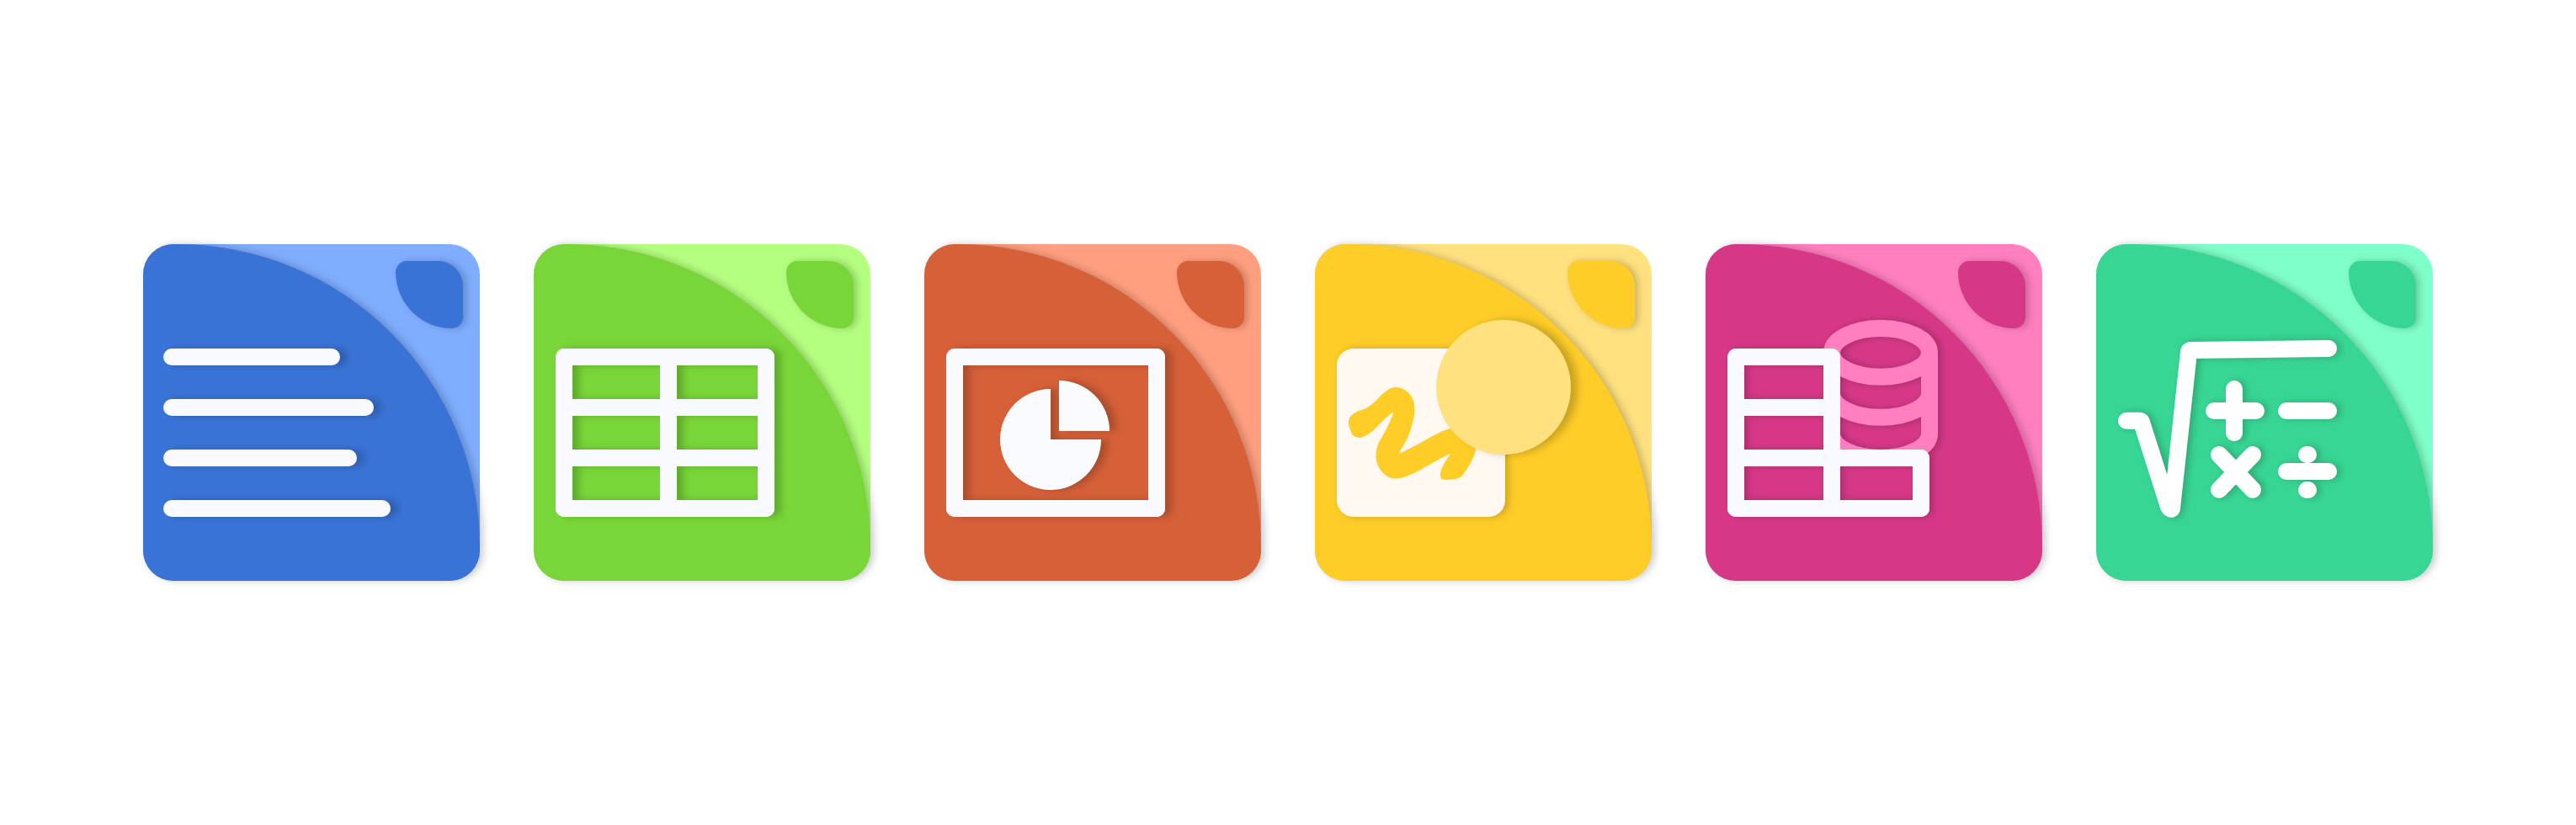 LibreOffice Icons Proposal.png